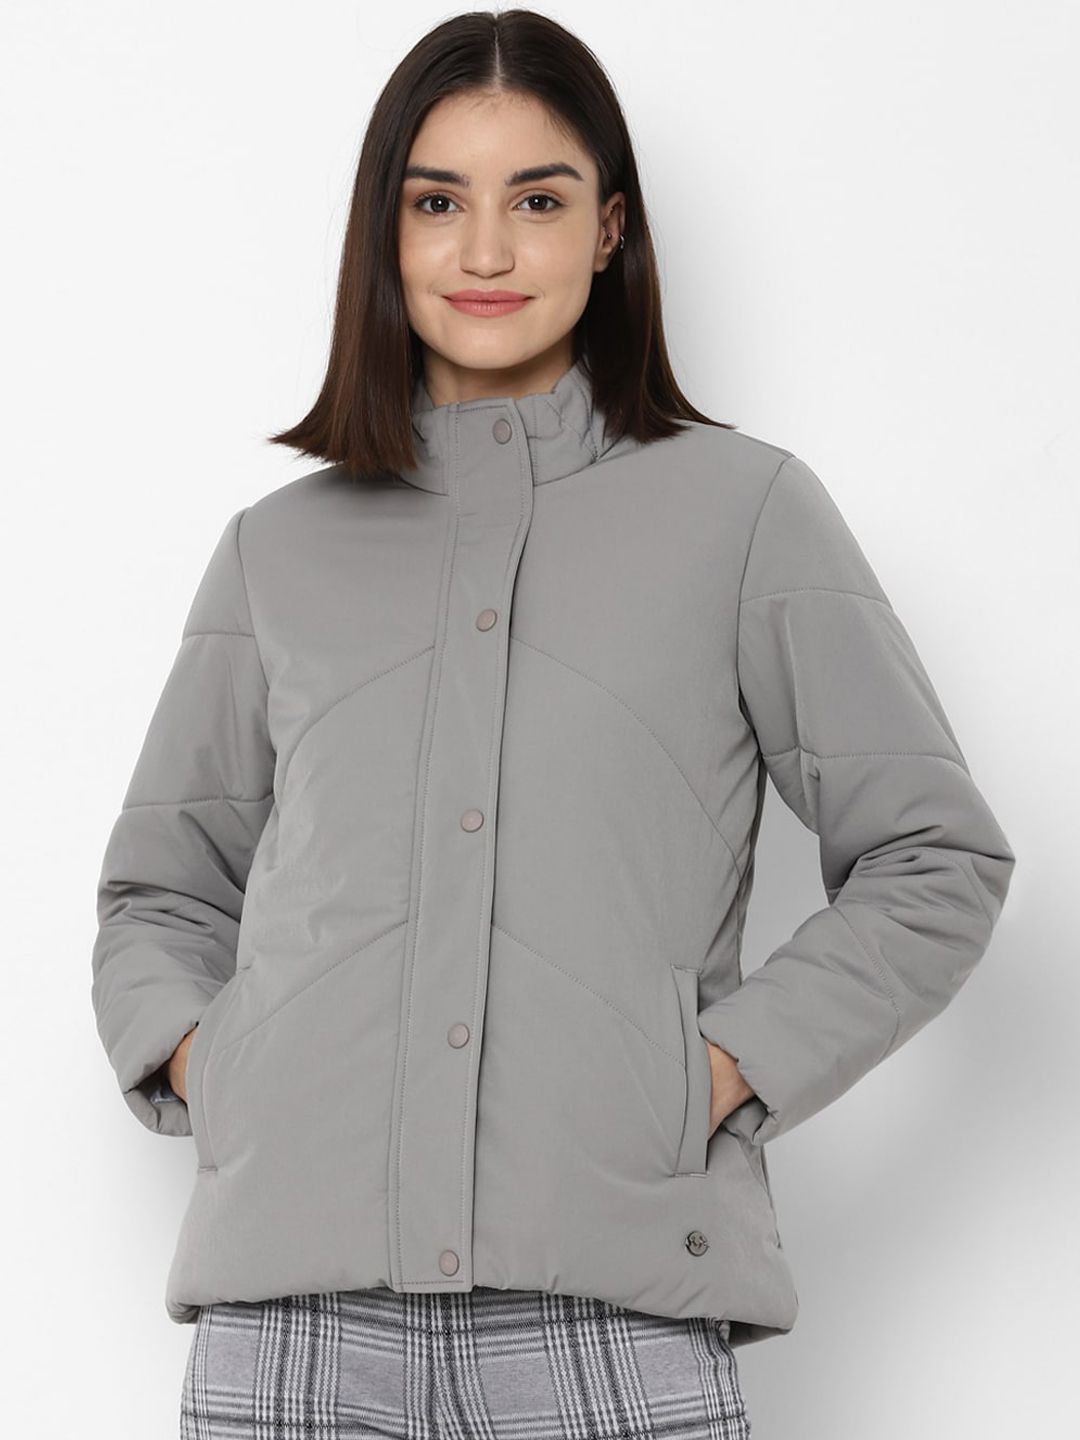 Allen Solly Woman Women Grey Padded Jacket Price in India